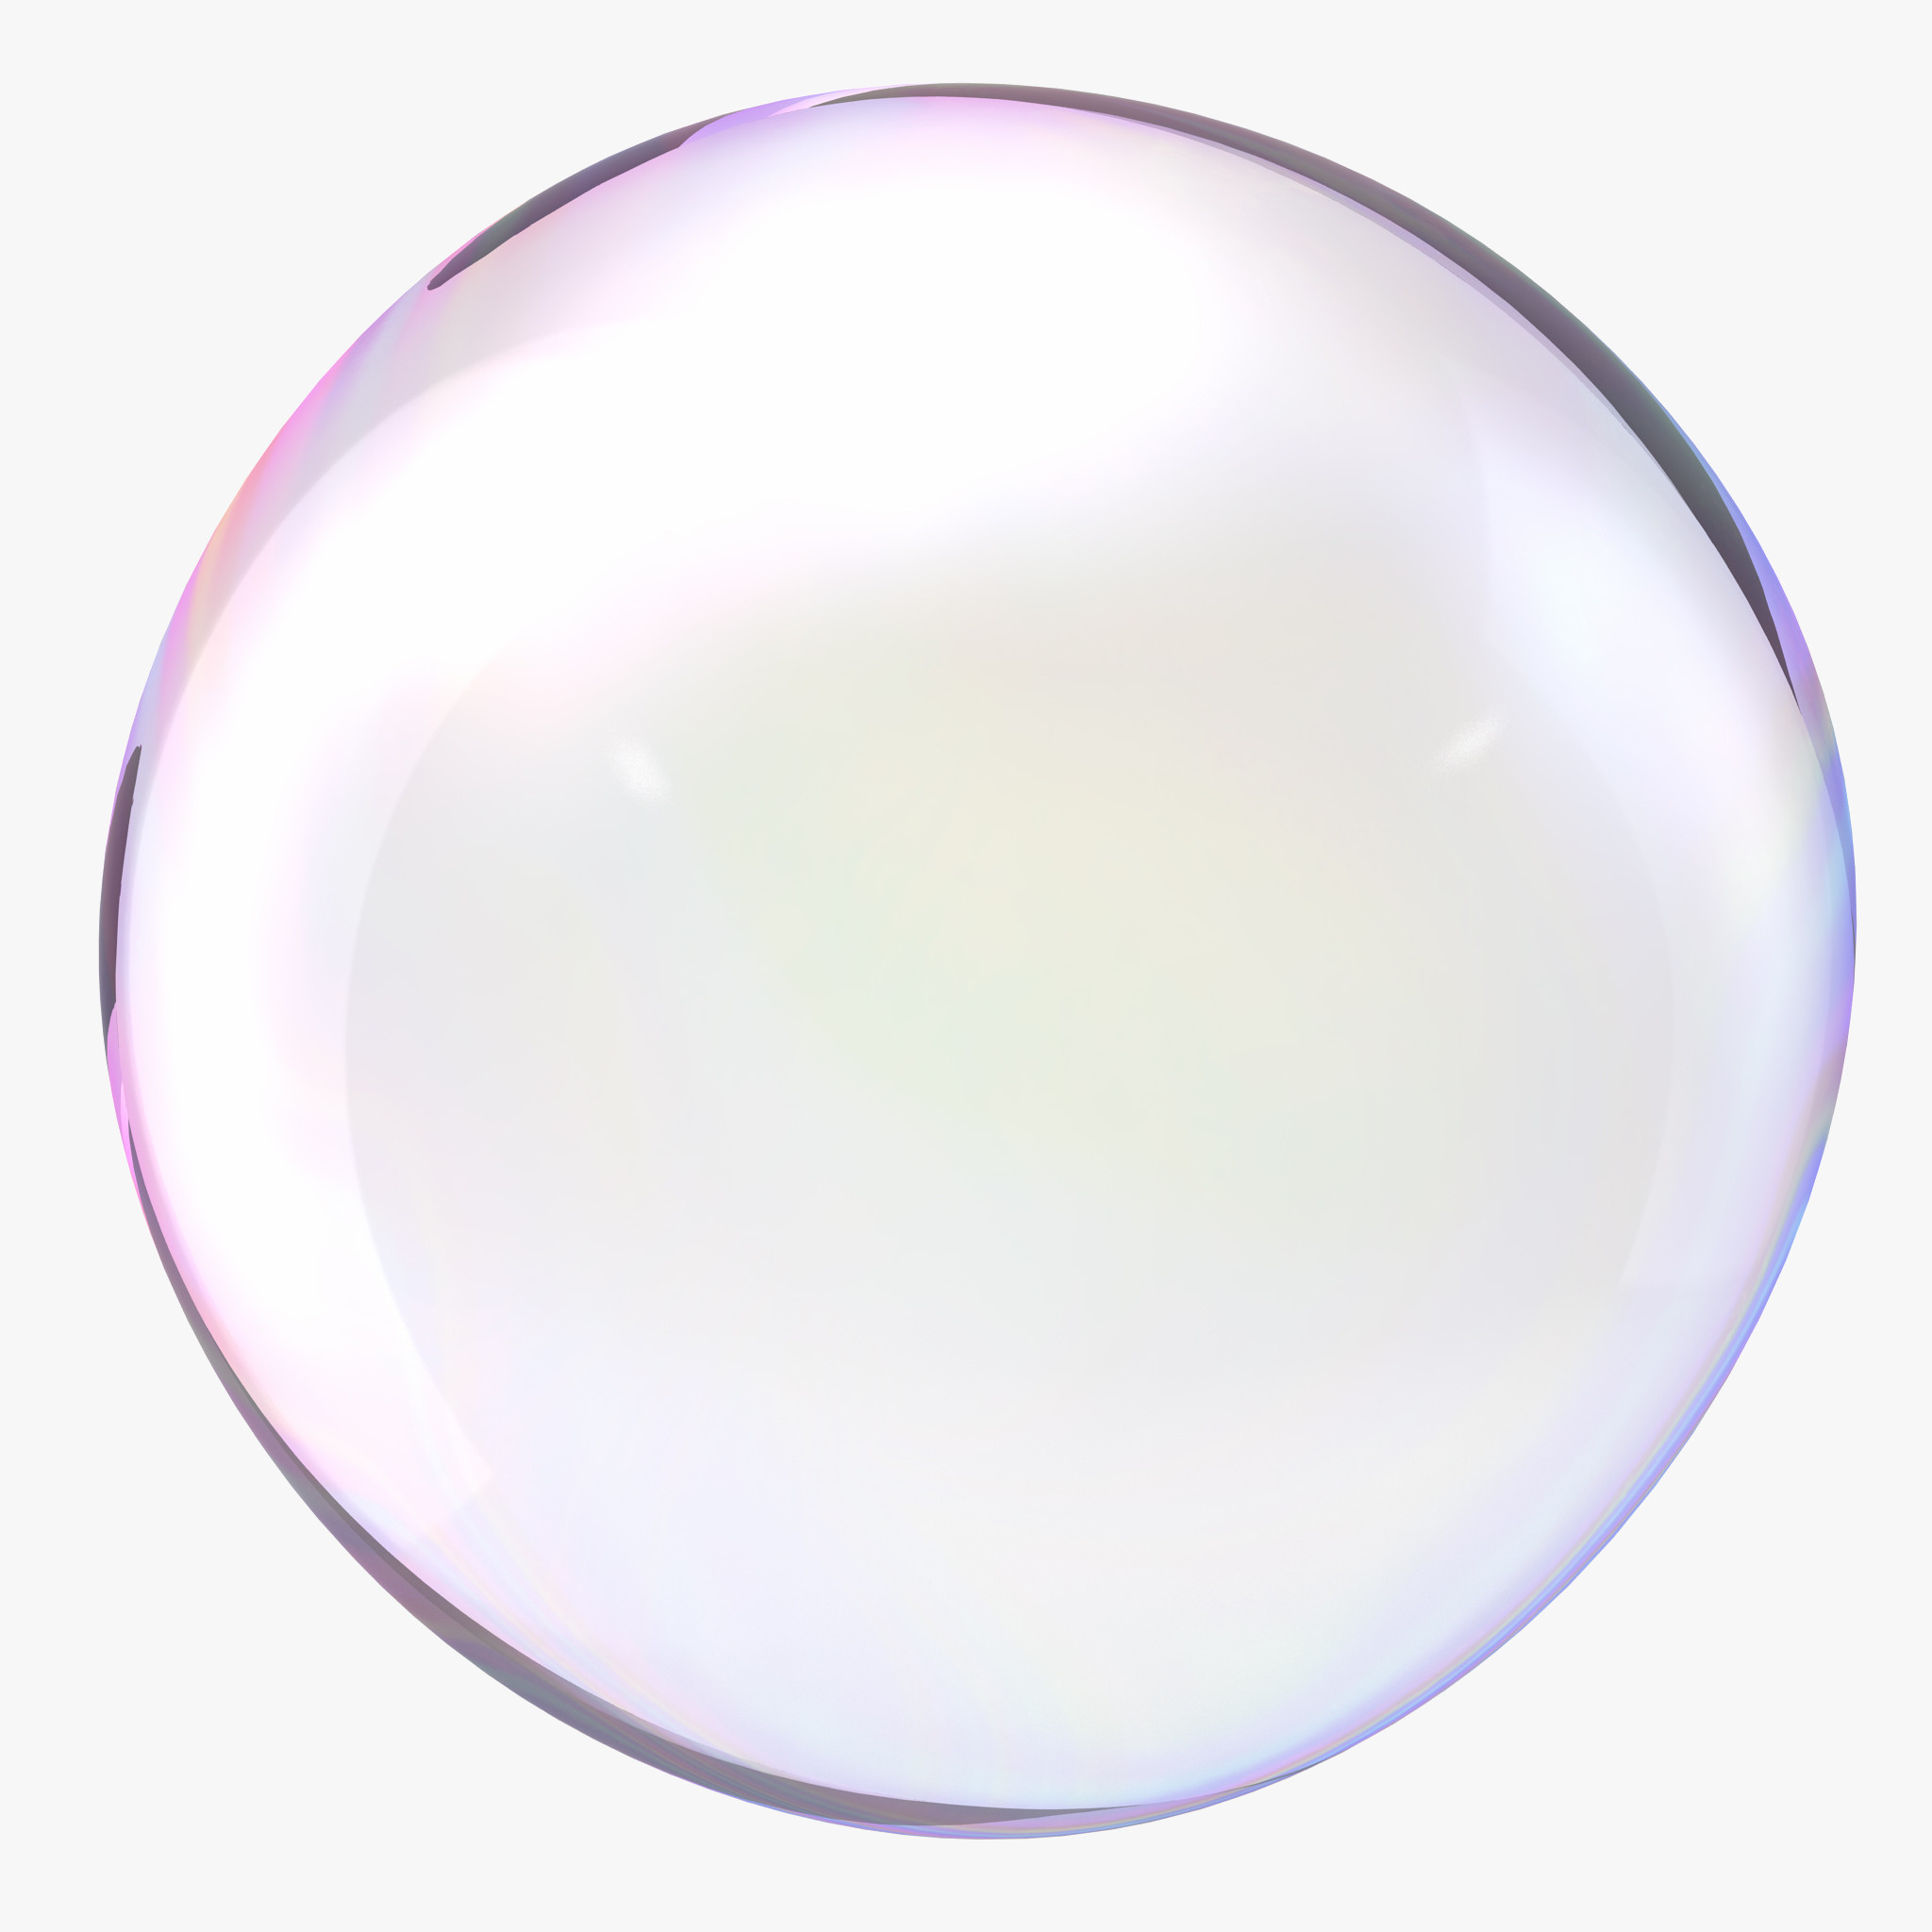 Gaussian Distributions are Soap Bubbles